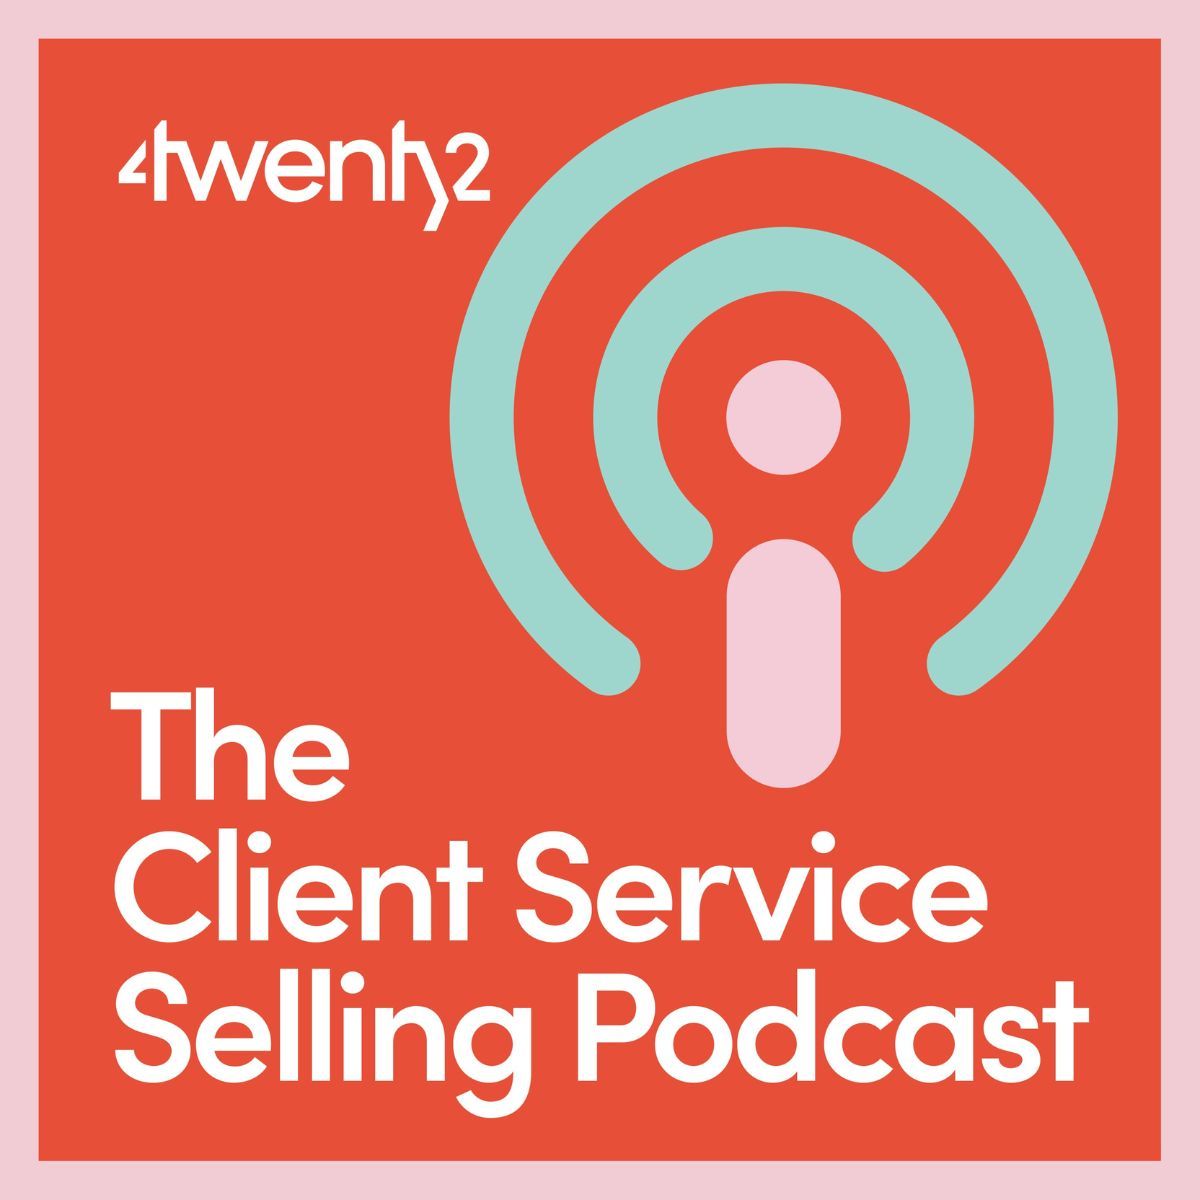 Hurry if you want to ask us a burning question on anything to do with your client team finding more growth! We’re taking final questions by the end of tomorrow, and choosing the ones we’ll be answering in the next #clientserviceselling podcast coming out soon! #begrowth #fireaway